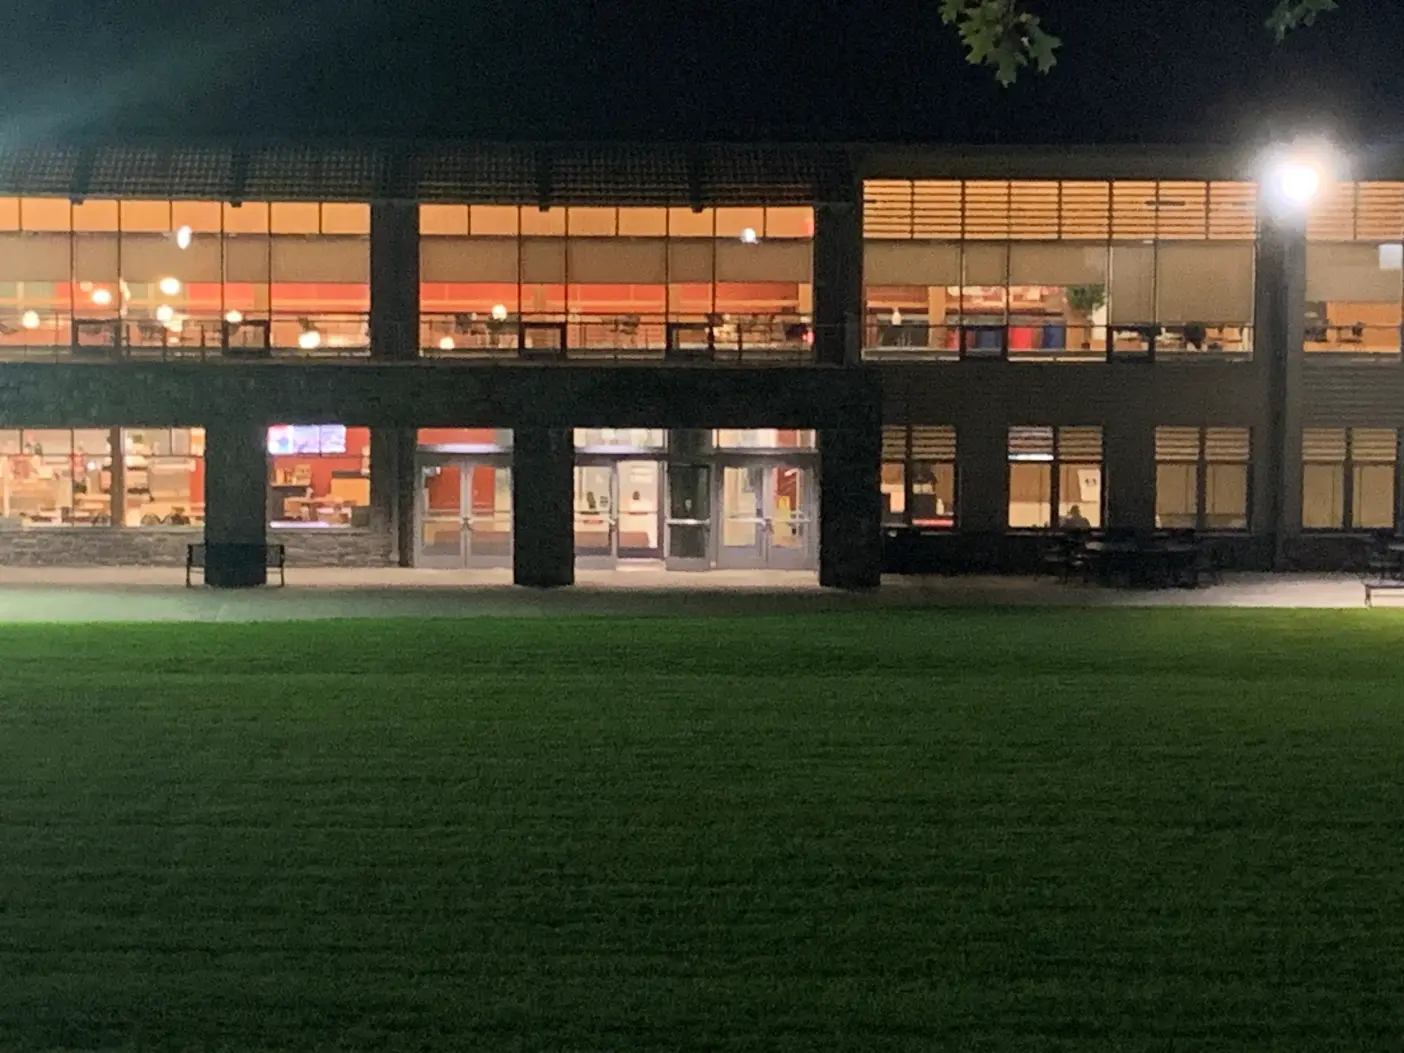 The Commons at night.